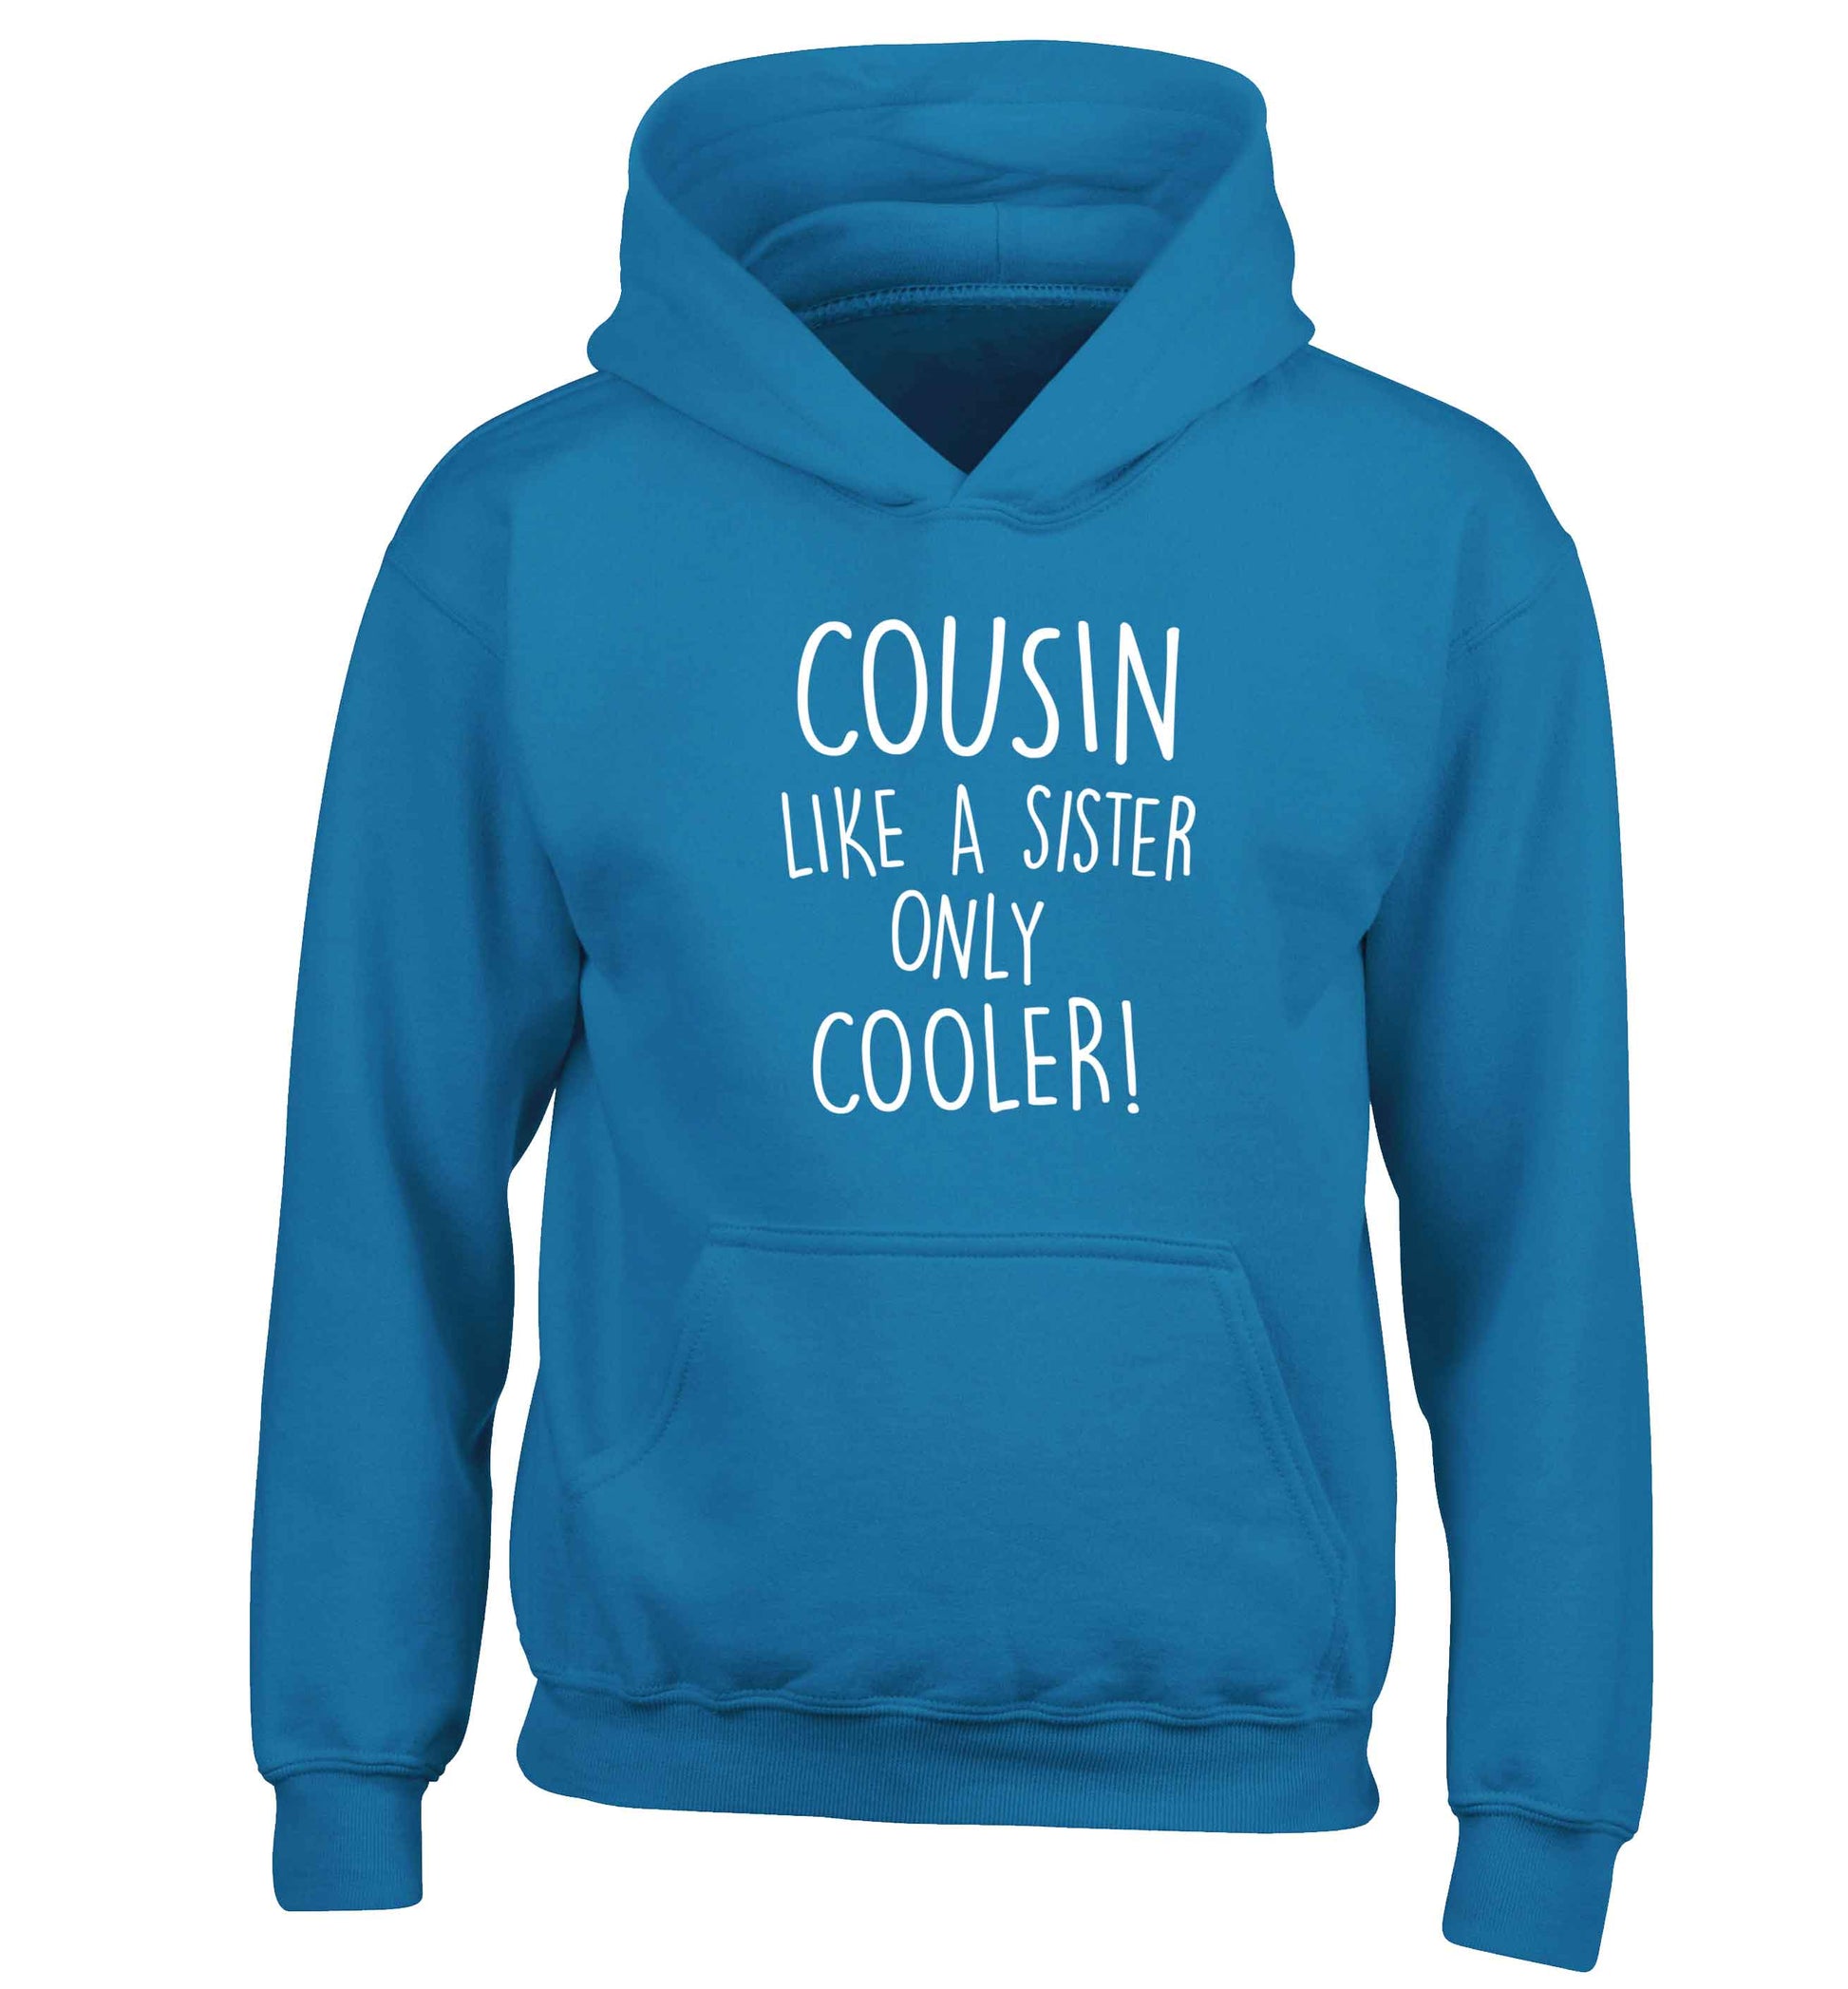 Cousin like a sister only cooler children's blue hoodie 12-13 Years